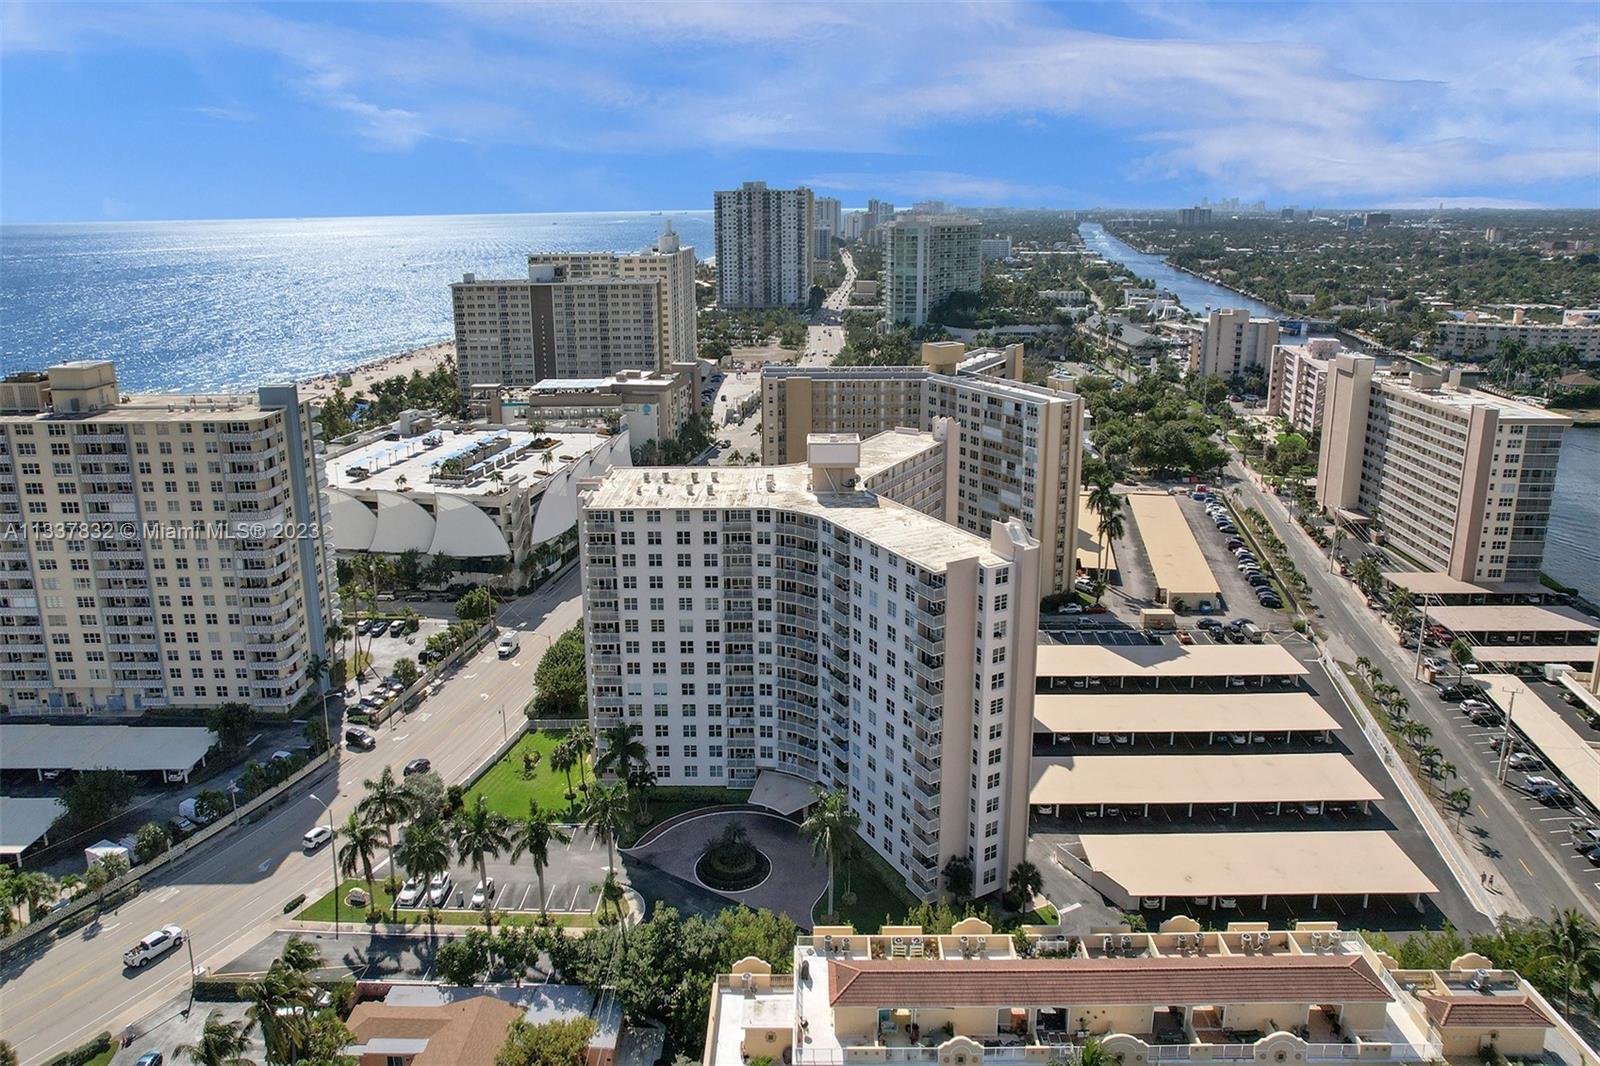 WELCOME TO THE NASSAU HOUSE CONDOMINIUM WTH RESORT STYLE AMENITIES LOCATED ON A1A IN THE HEART OF TH